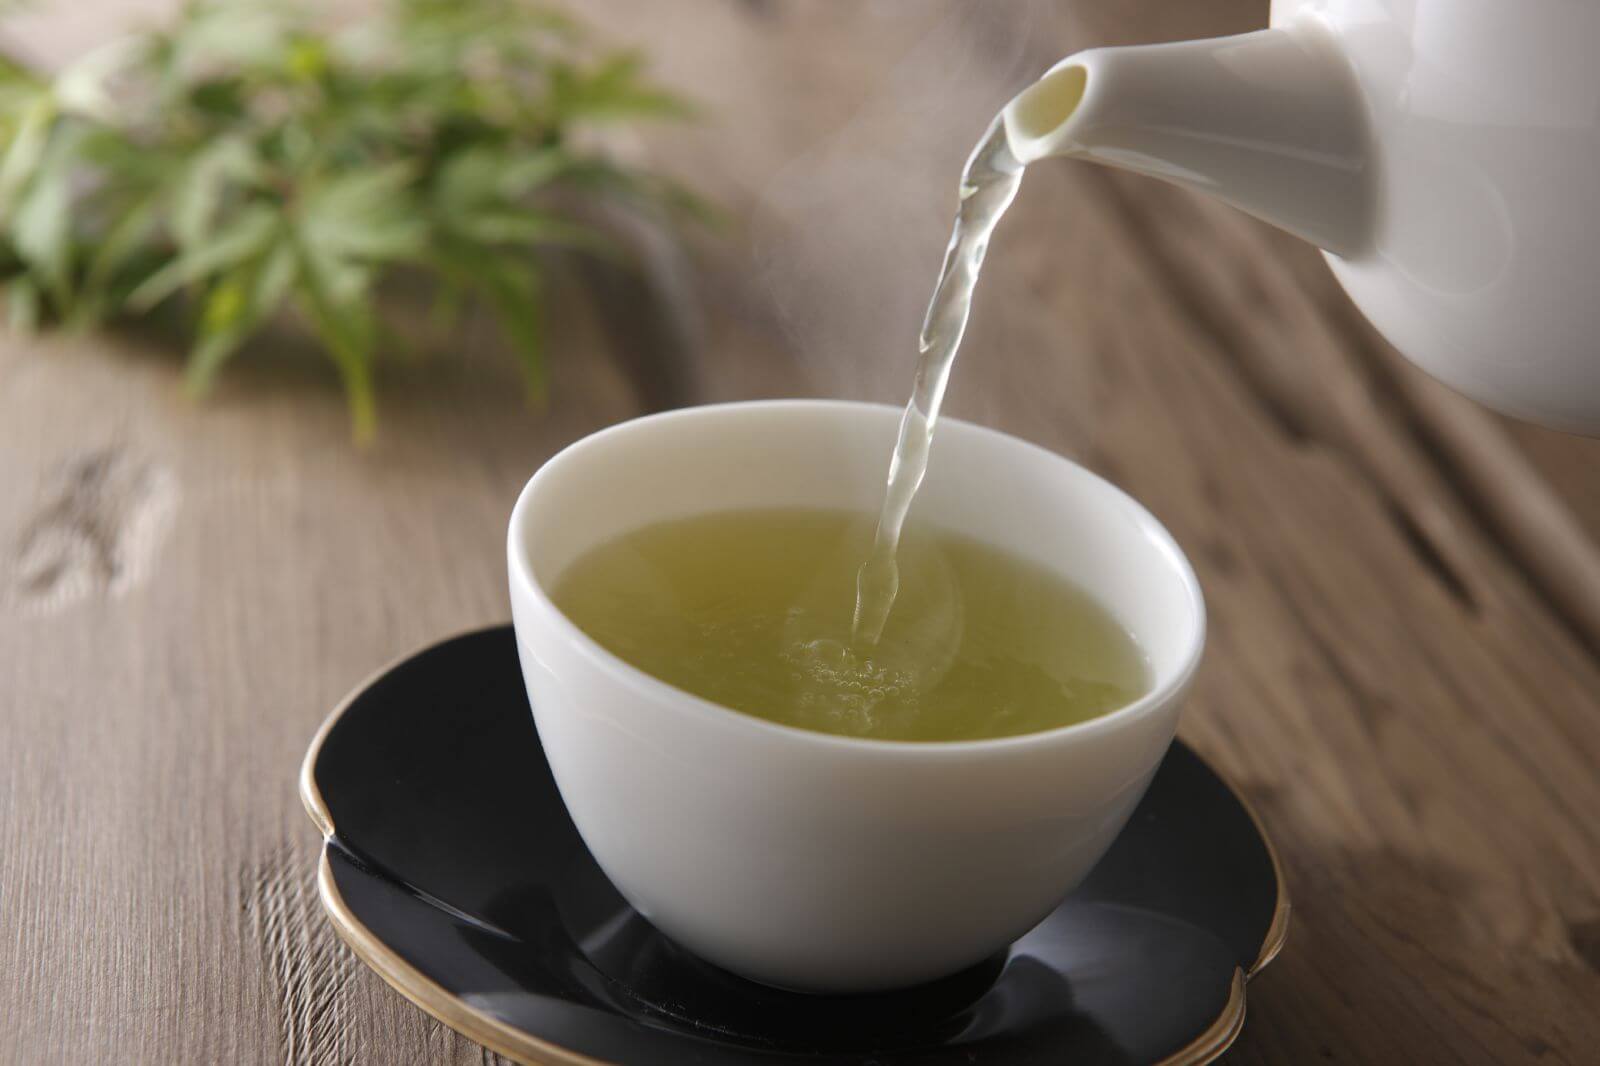 Regular consumption of tea is associated with increased life expectancy